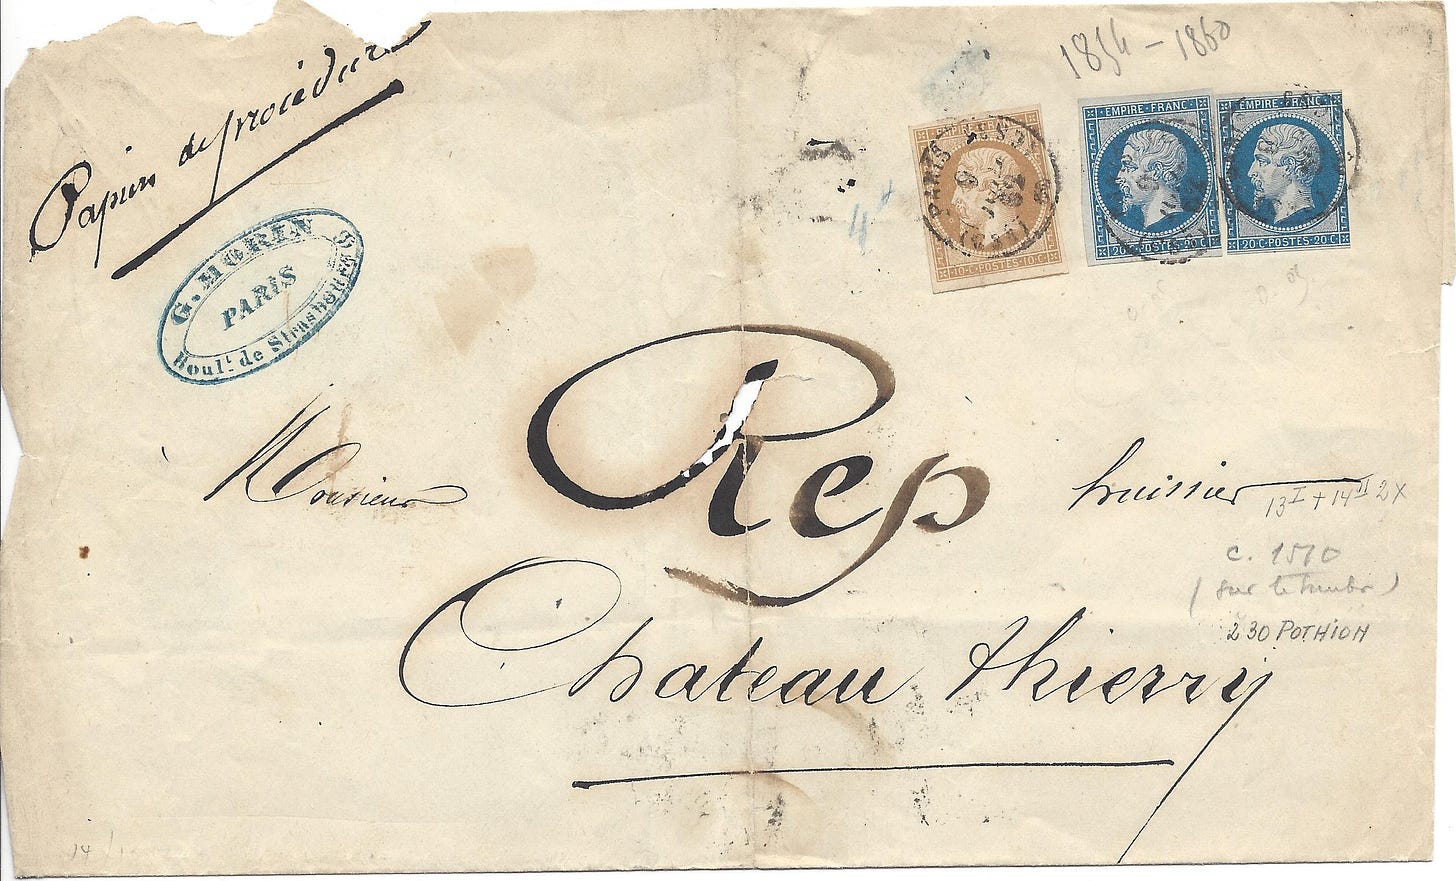 Large envelope mailed in 1862 carrying business papers